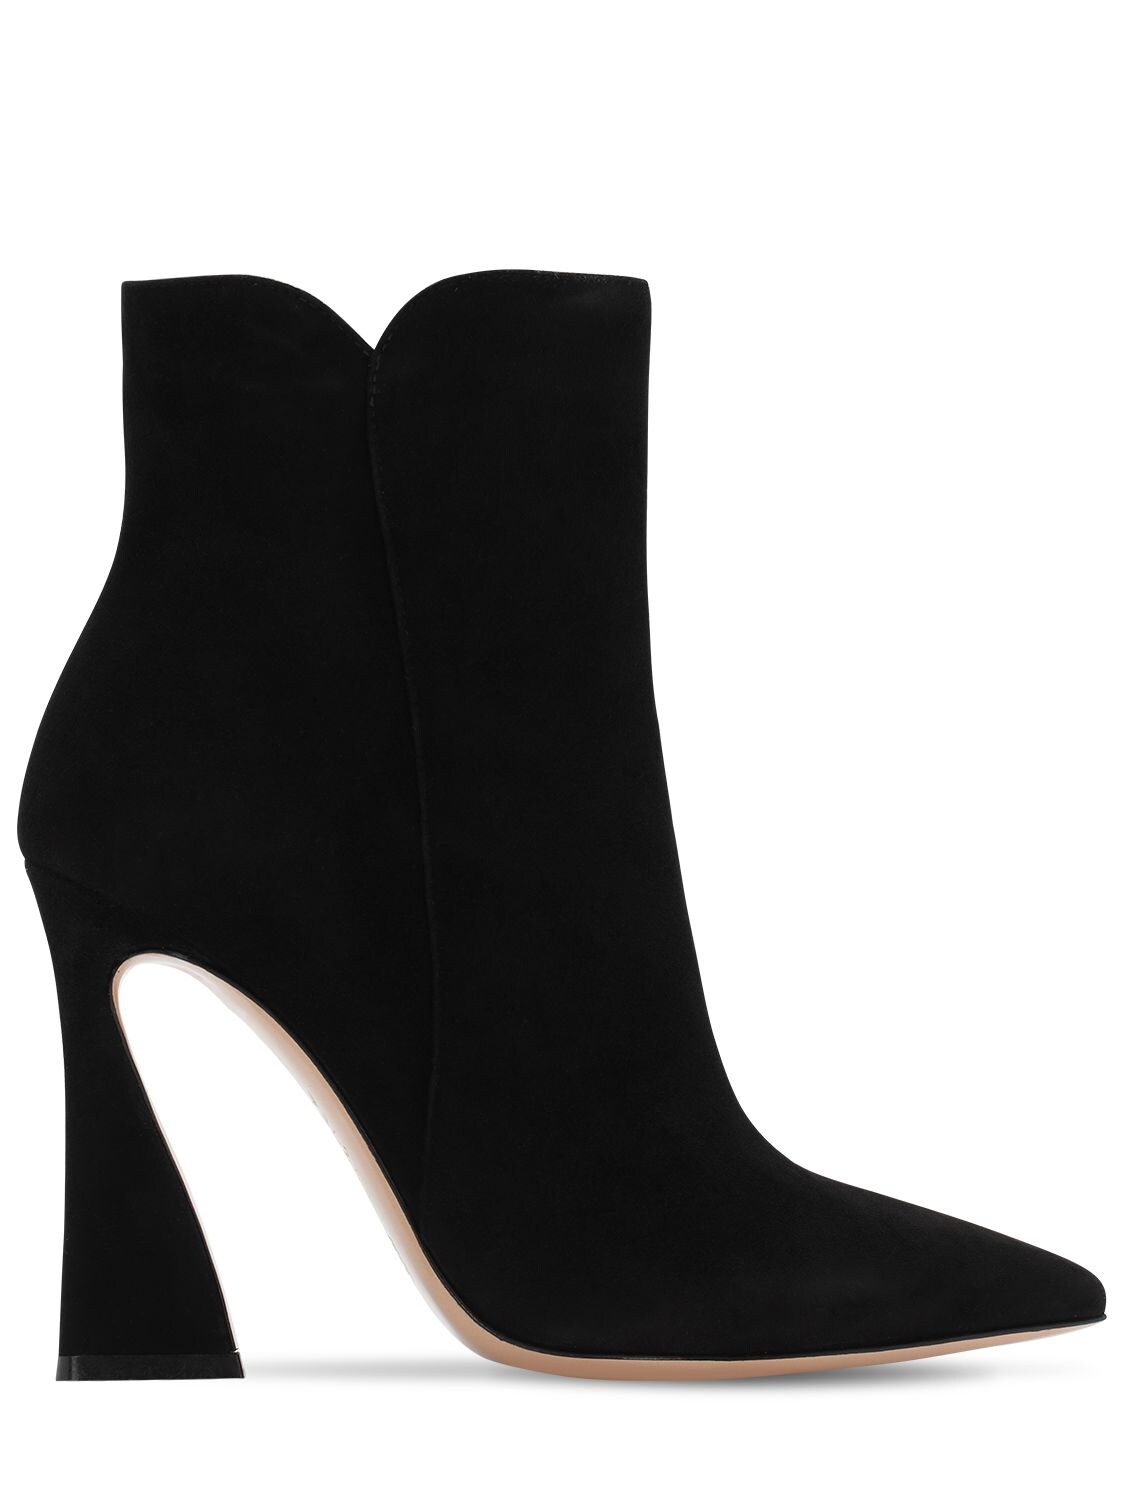 GIANVITO ROSSI 105MM SUEDE ANKLE BOOTS,72I83R003-QKXBQ0S1